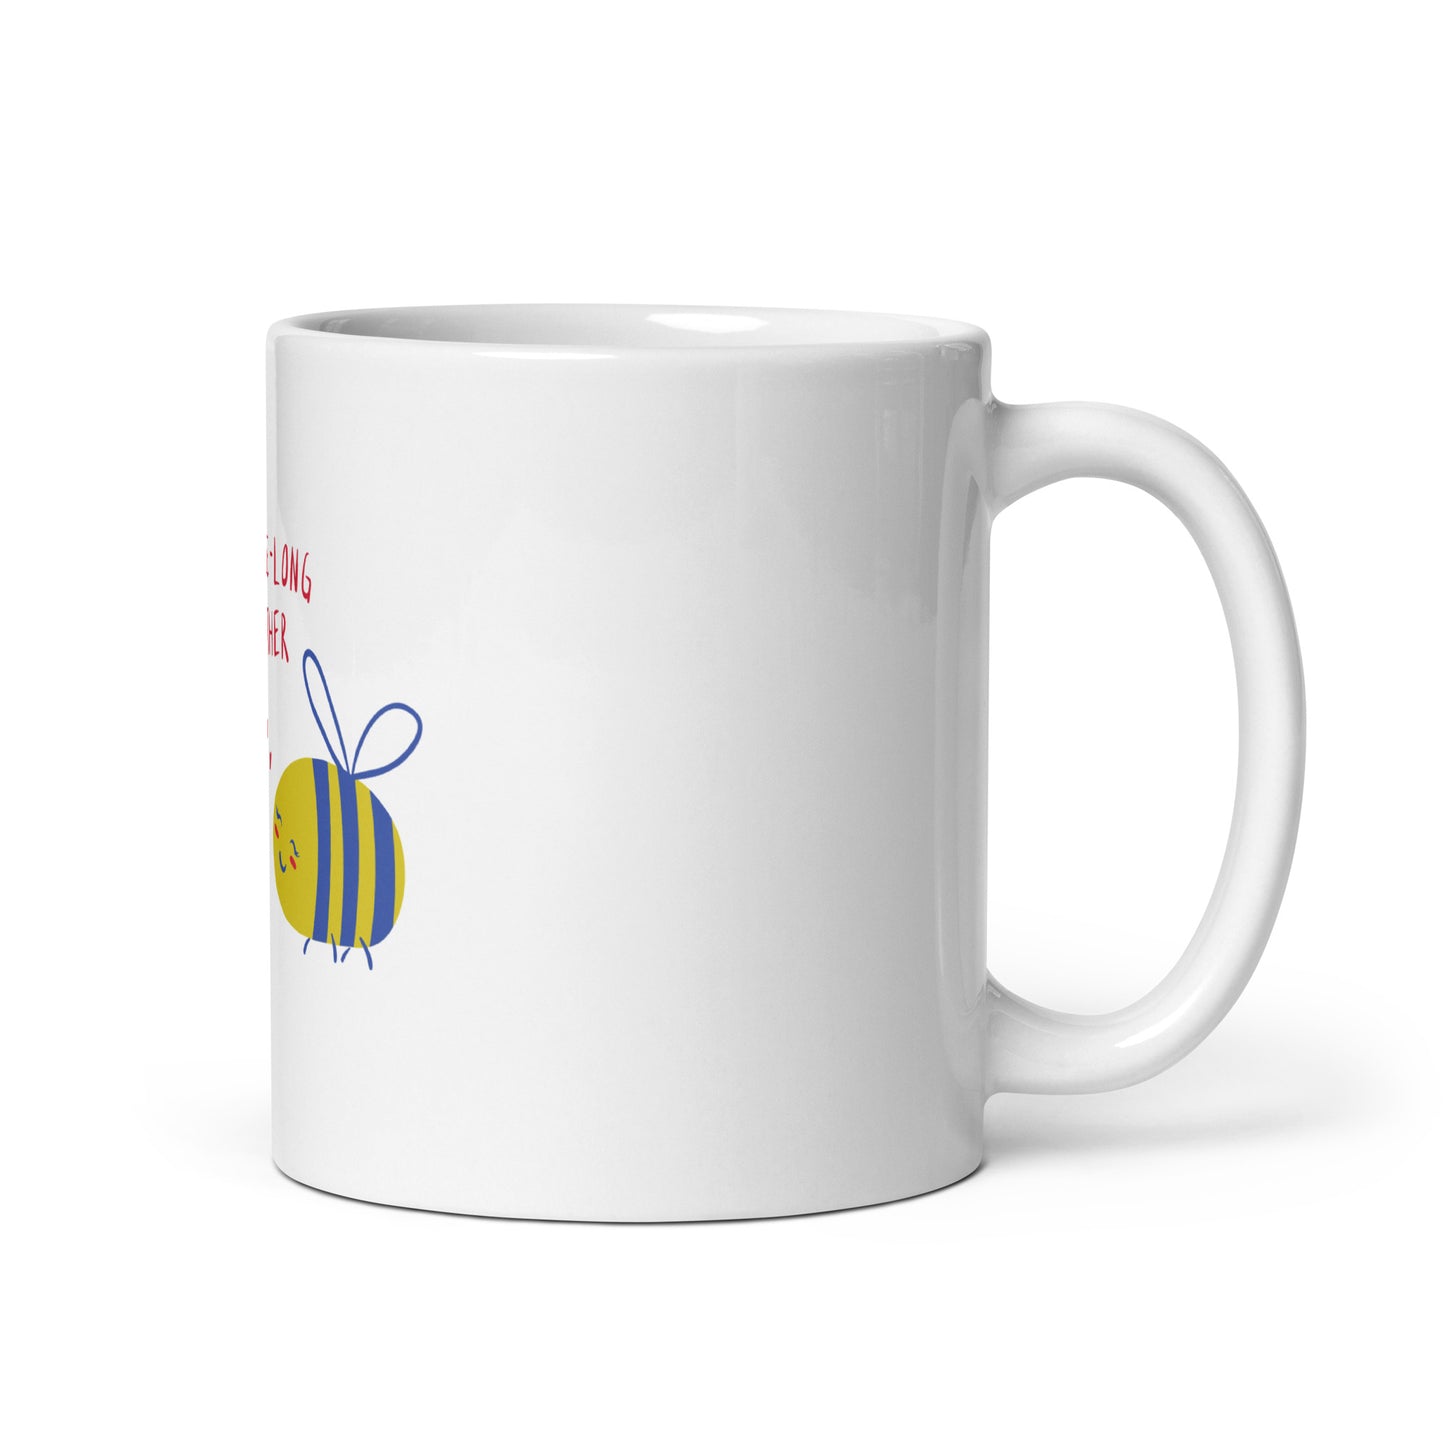 We Bee-Long Together - White Glossy Mug for Sweet Moments | Adorable Gift Choice